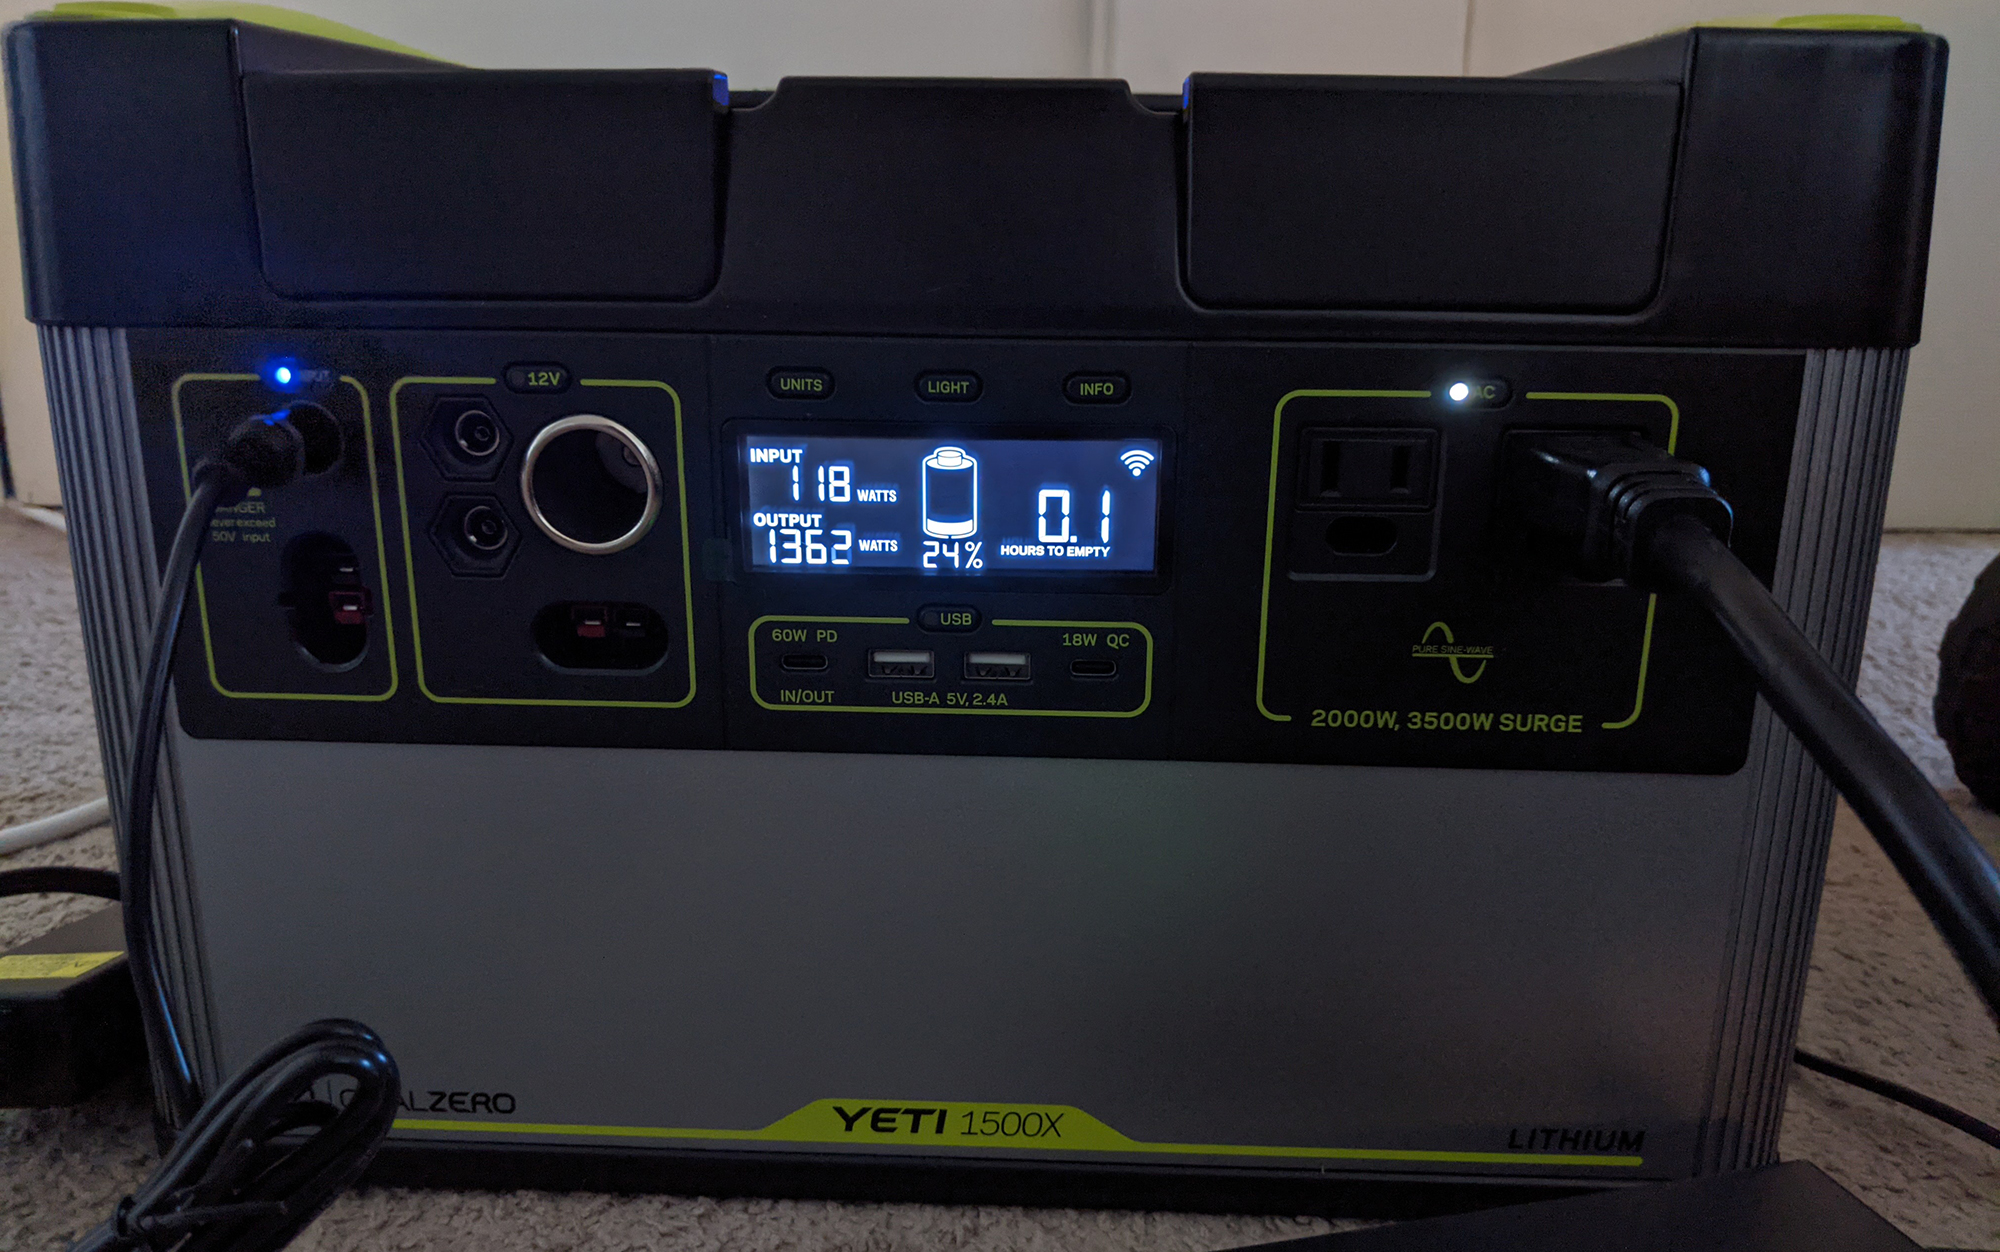 An output of 1362W was only a portion of the Yeti 1500X’s 2000W capacity.